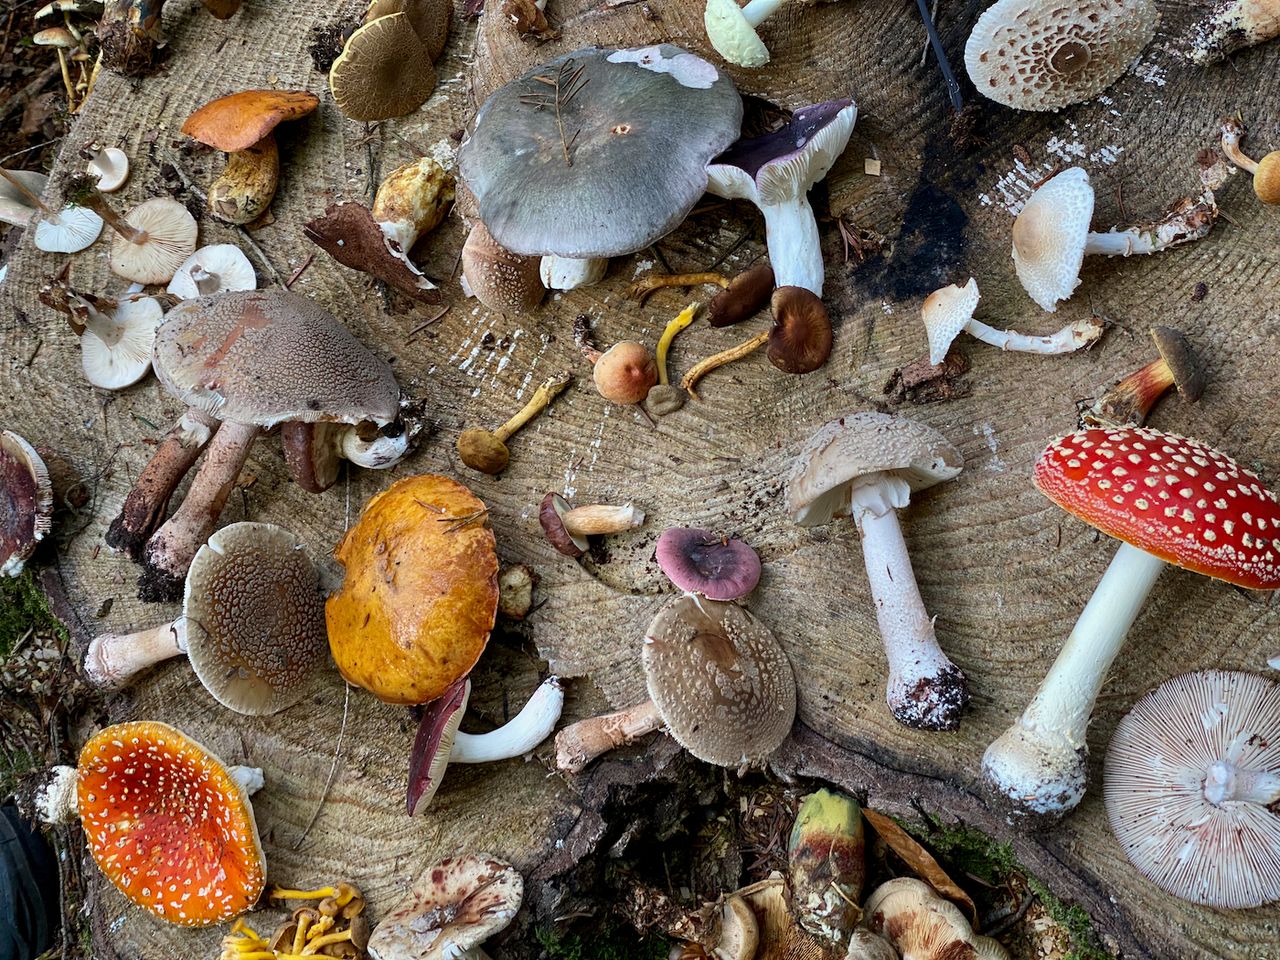 An assortment of mushrooms laid out on display on a cut stump.